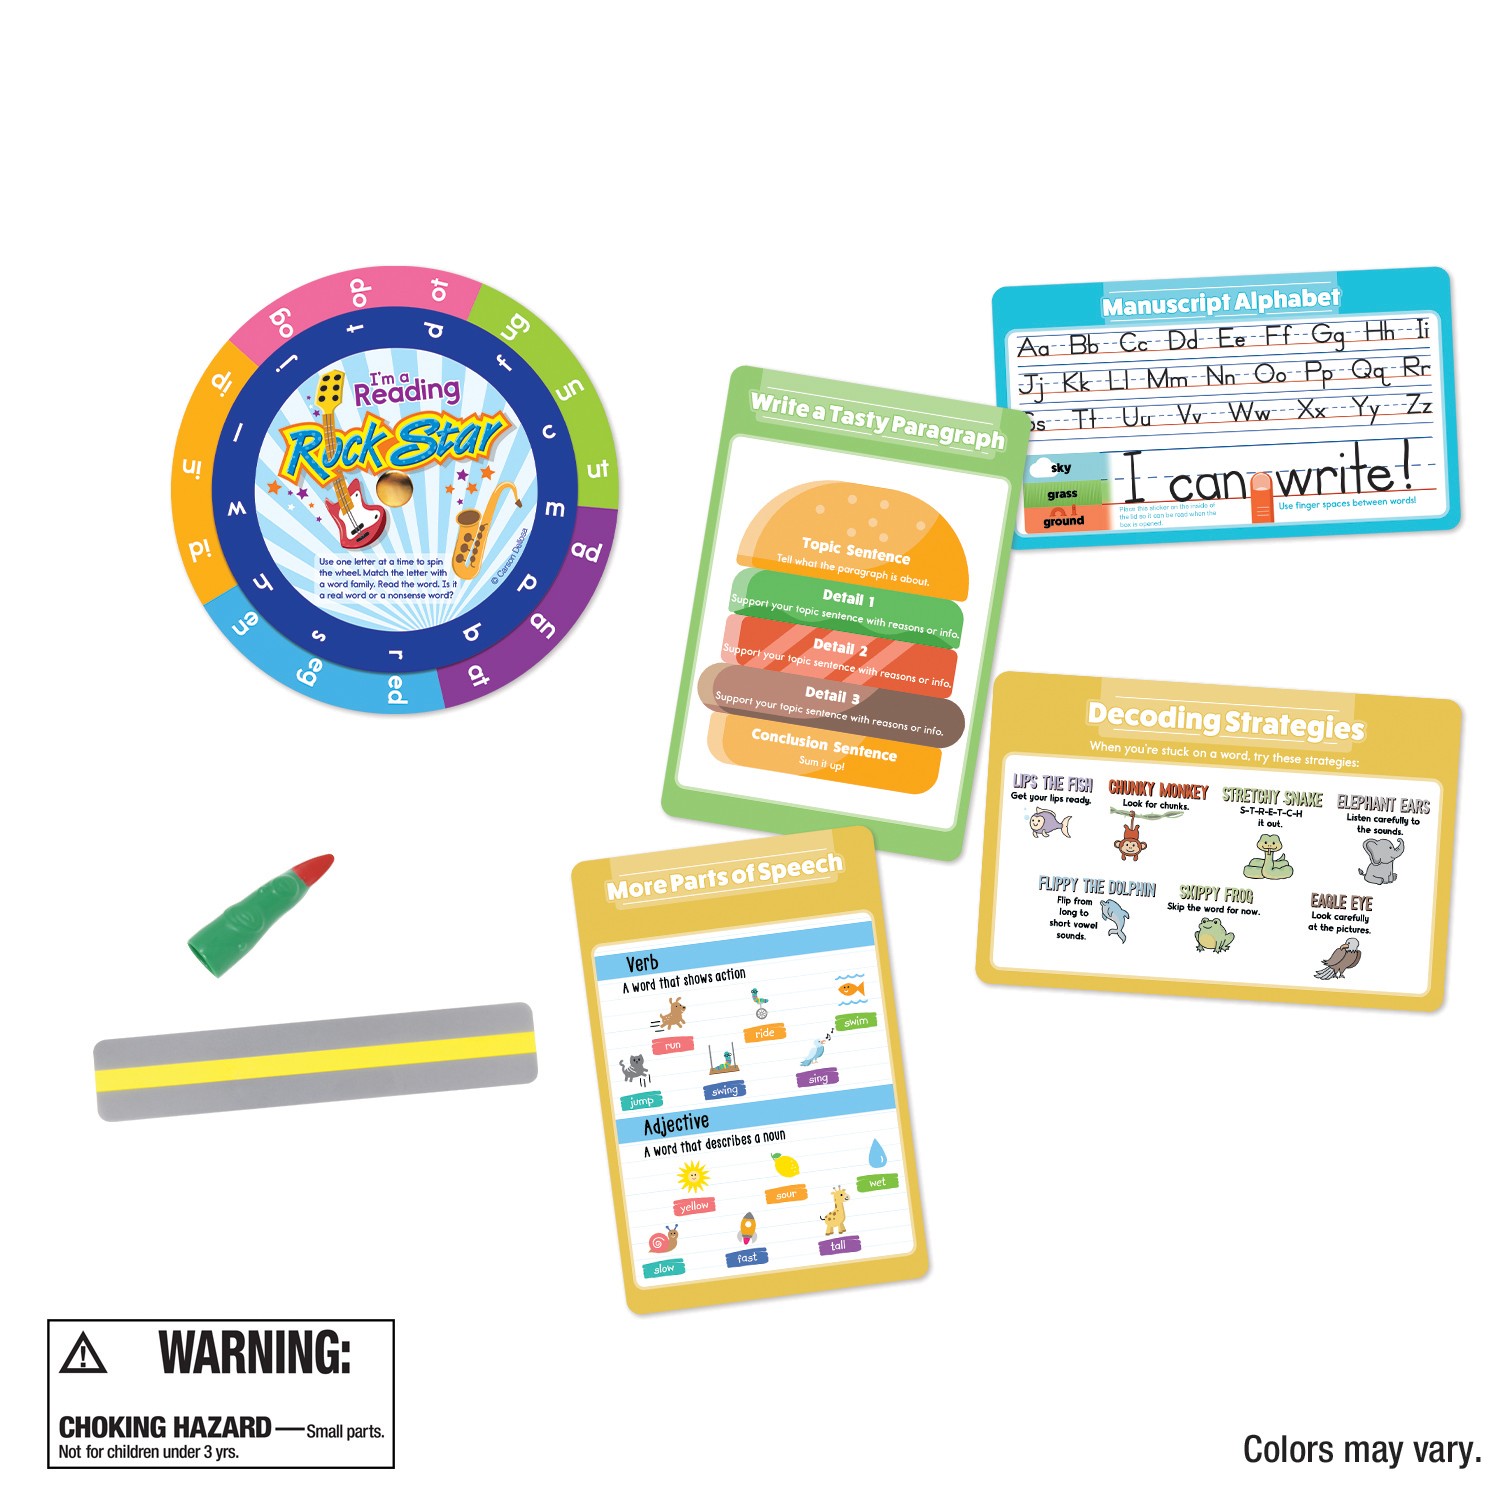 Be Clever Wherever Reading & Writing Tool Kit Manipulative, Grade K-2